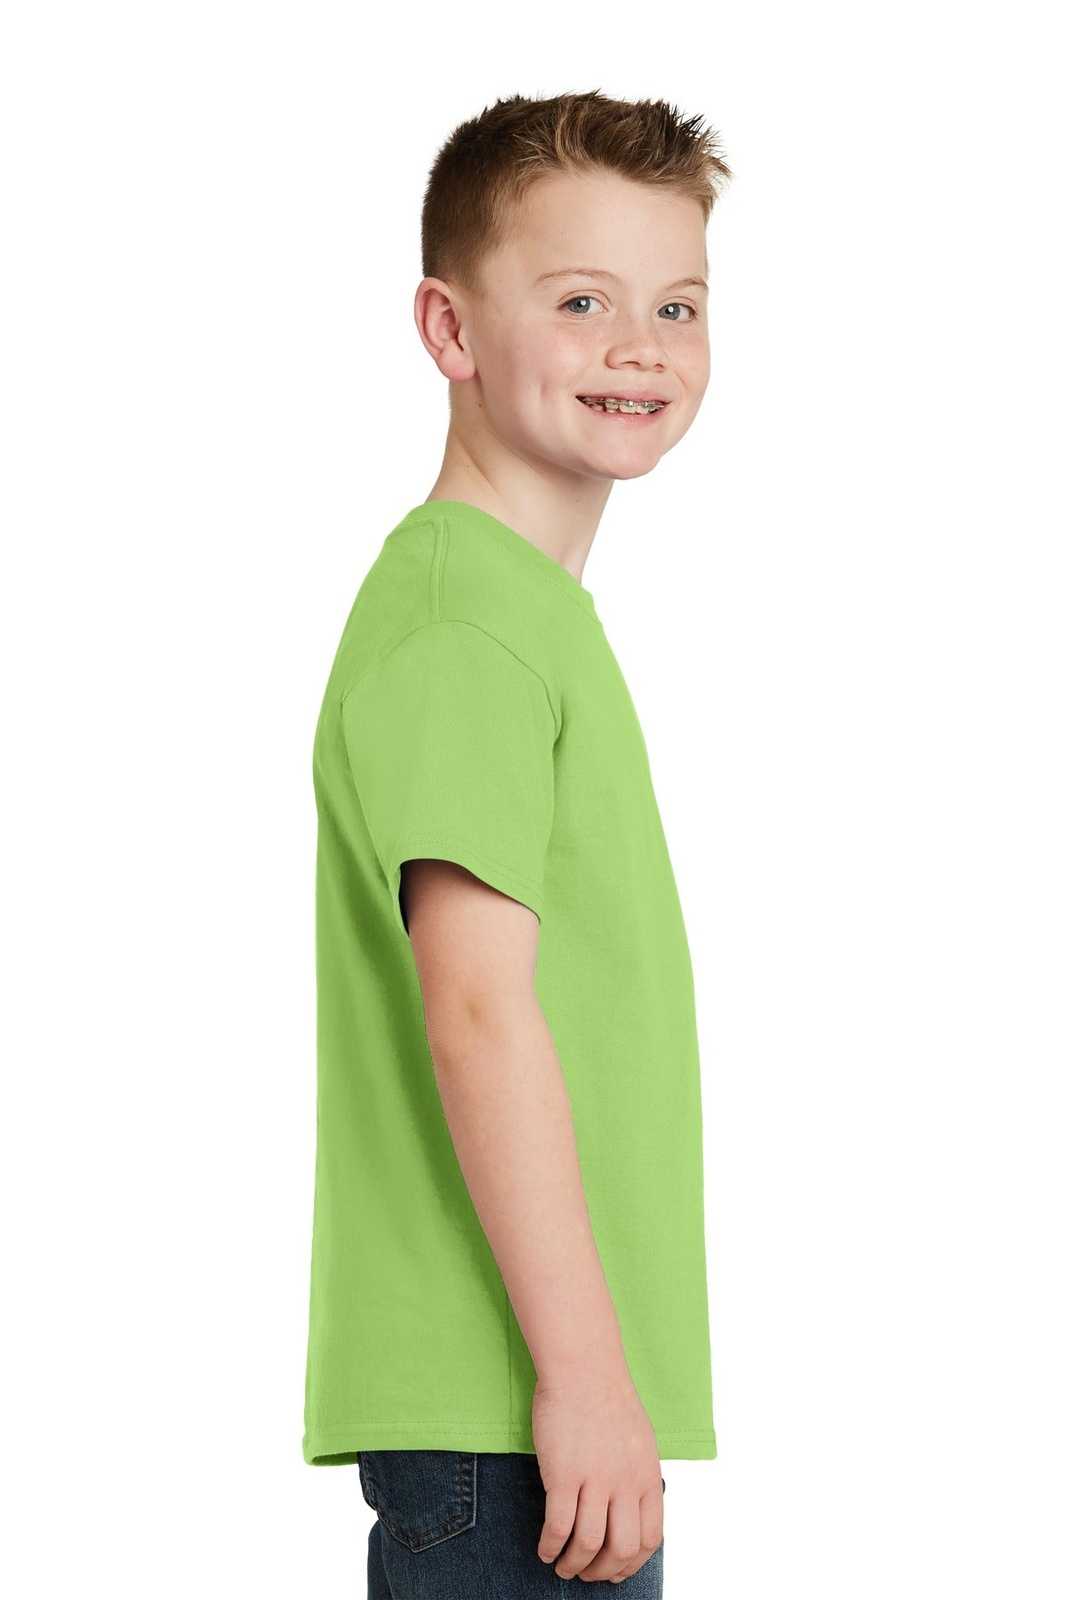 Hanes 5450 Youth Tagless 100% Cotton T-Shirt - Lime - HIT a Double